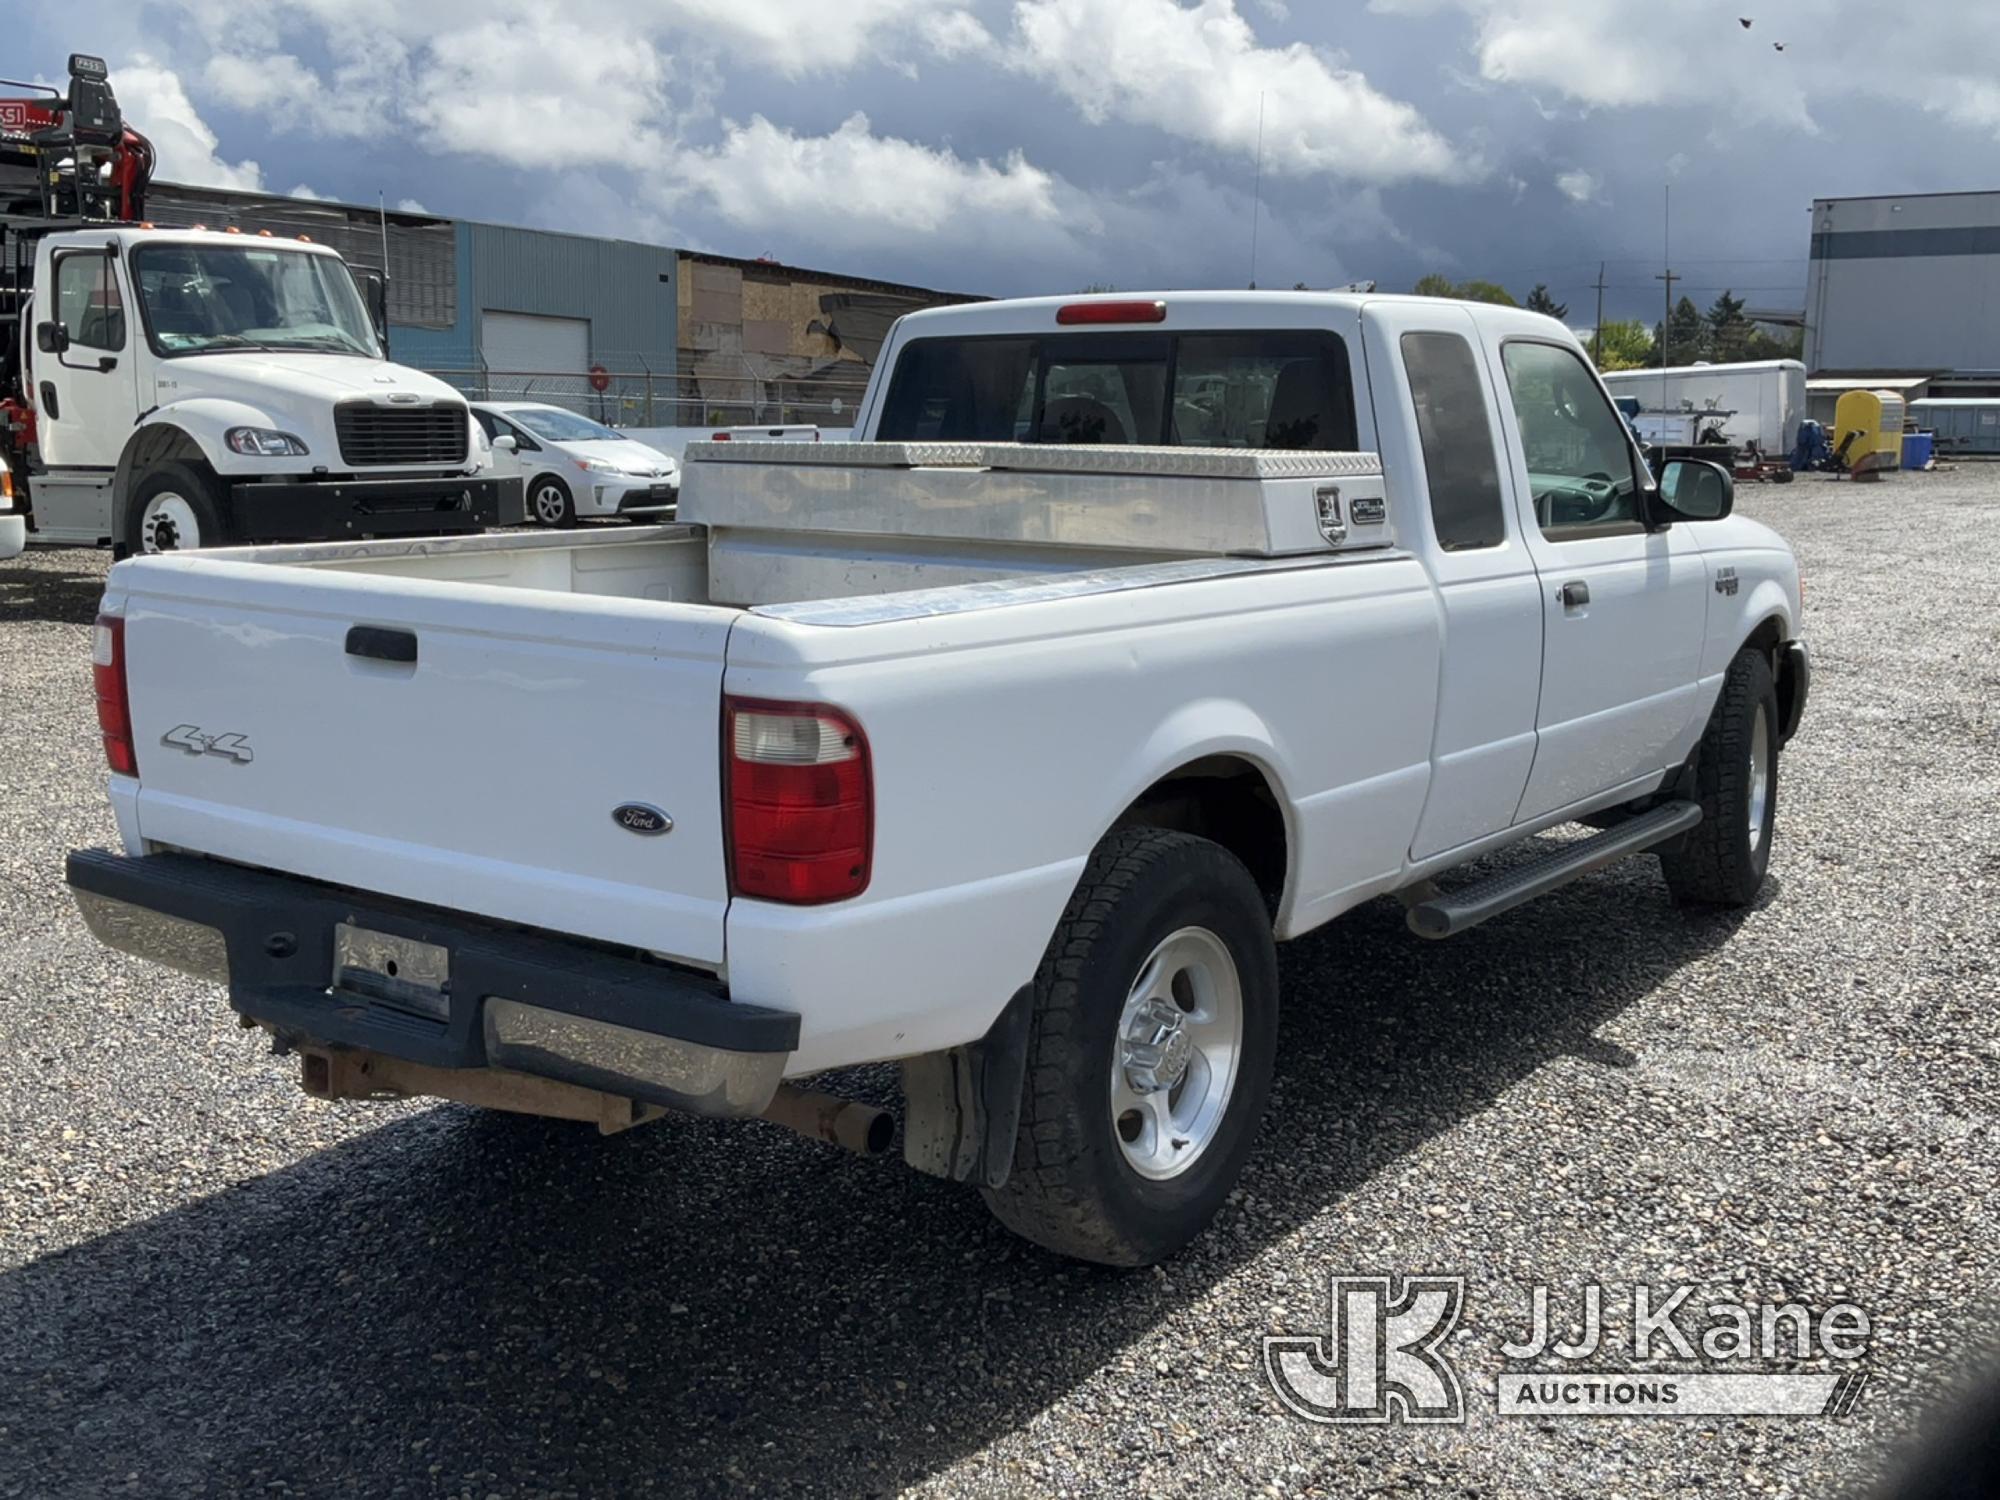 (Portland, OR) 2004 Ford Ranger 4x4 Extended-Cab Pickup Truck Runs & Moves